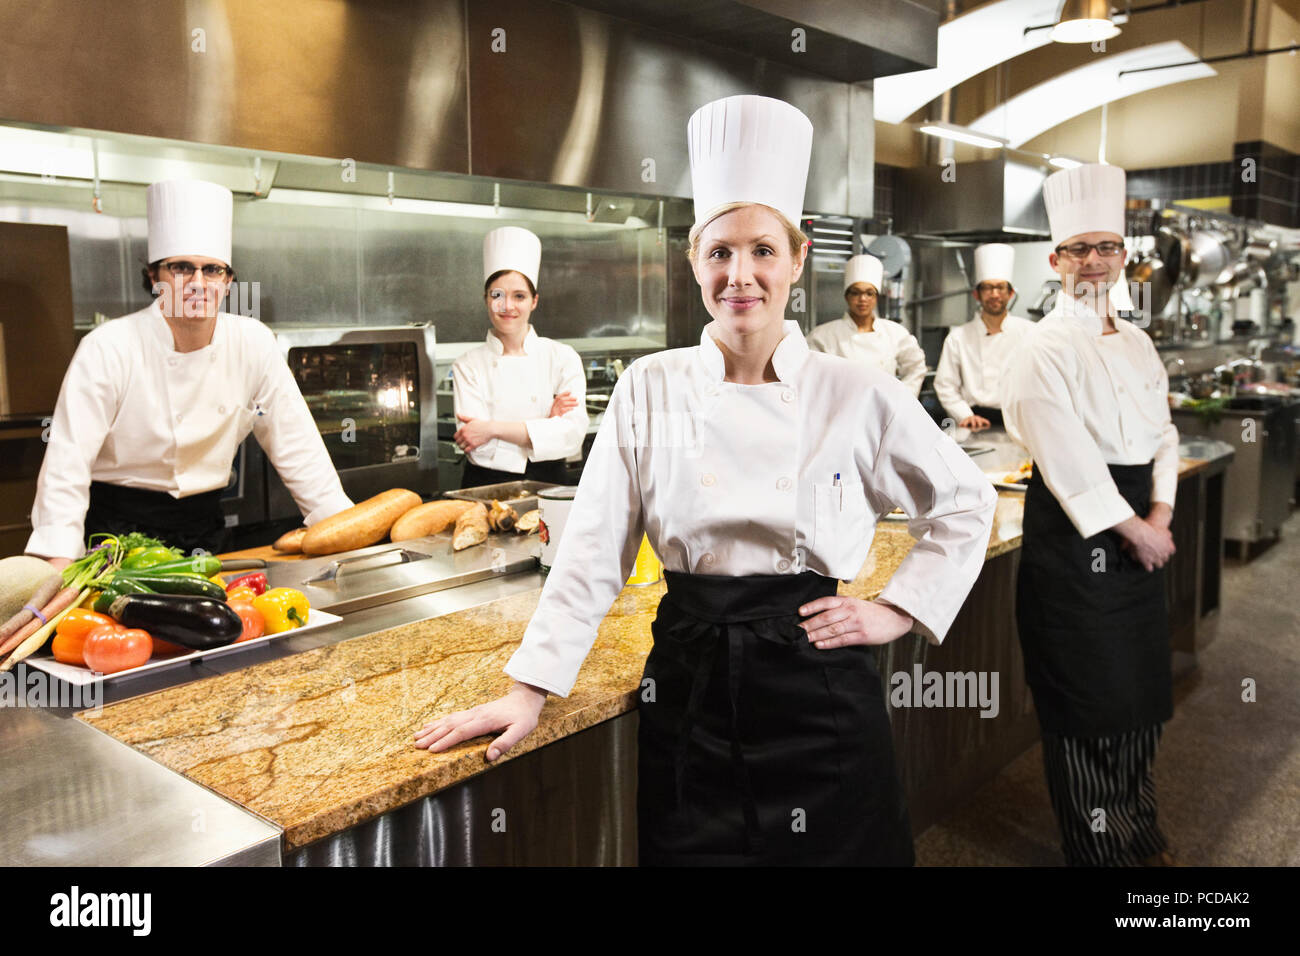 A portrait of a caucasian female chef and her team of chefs in the backgroiund. Stock Photo